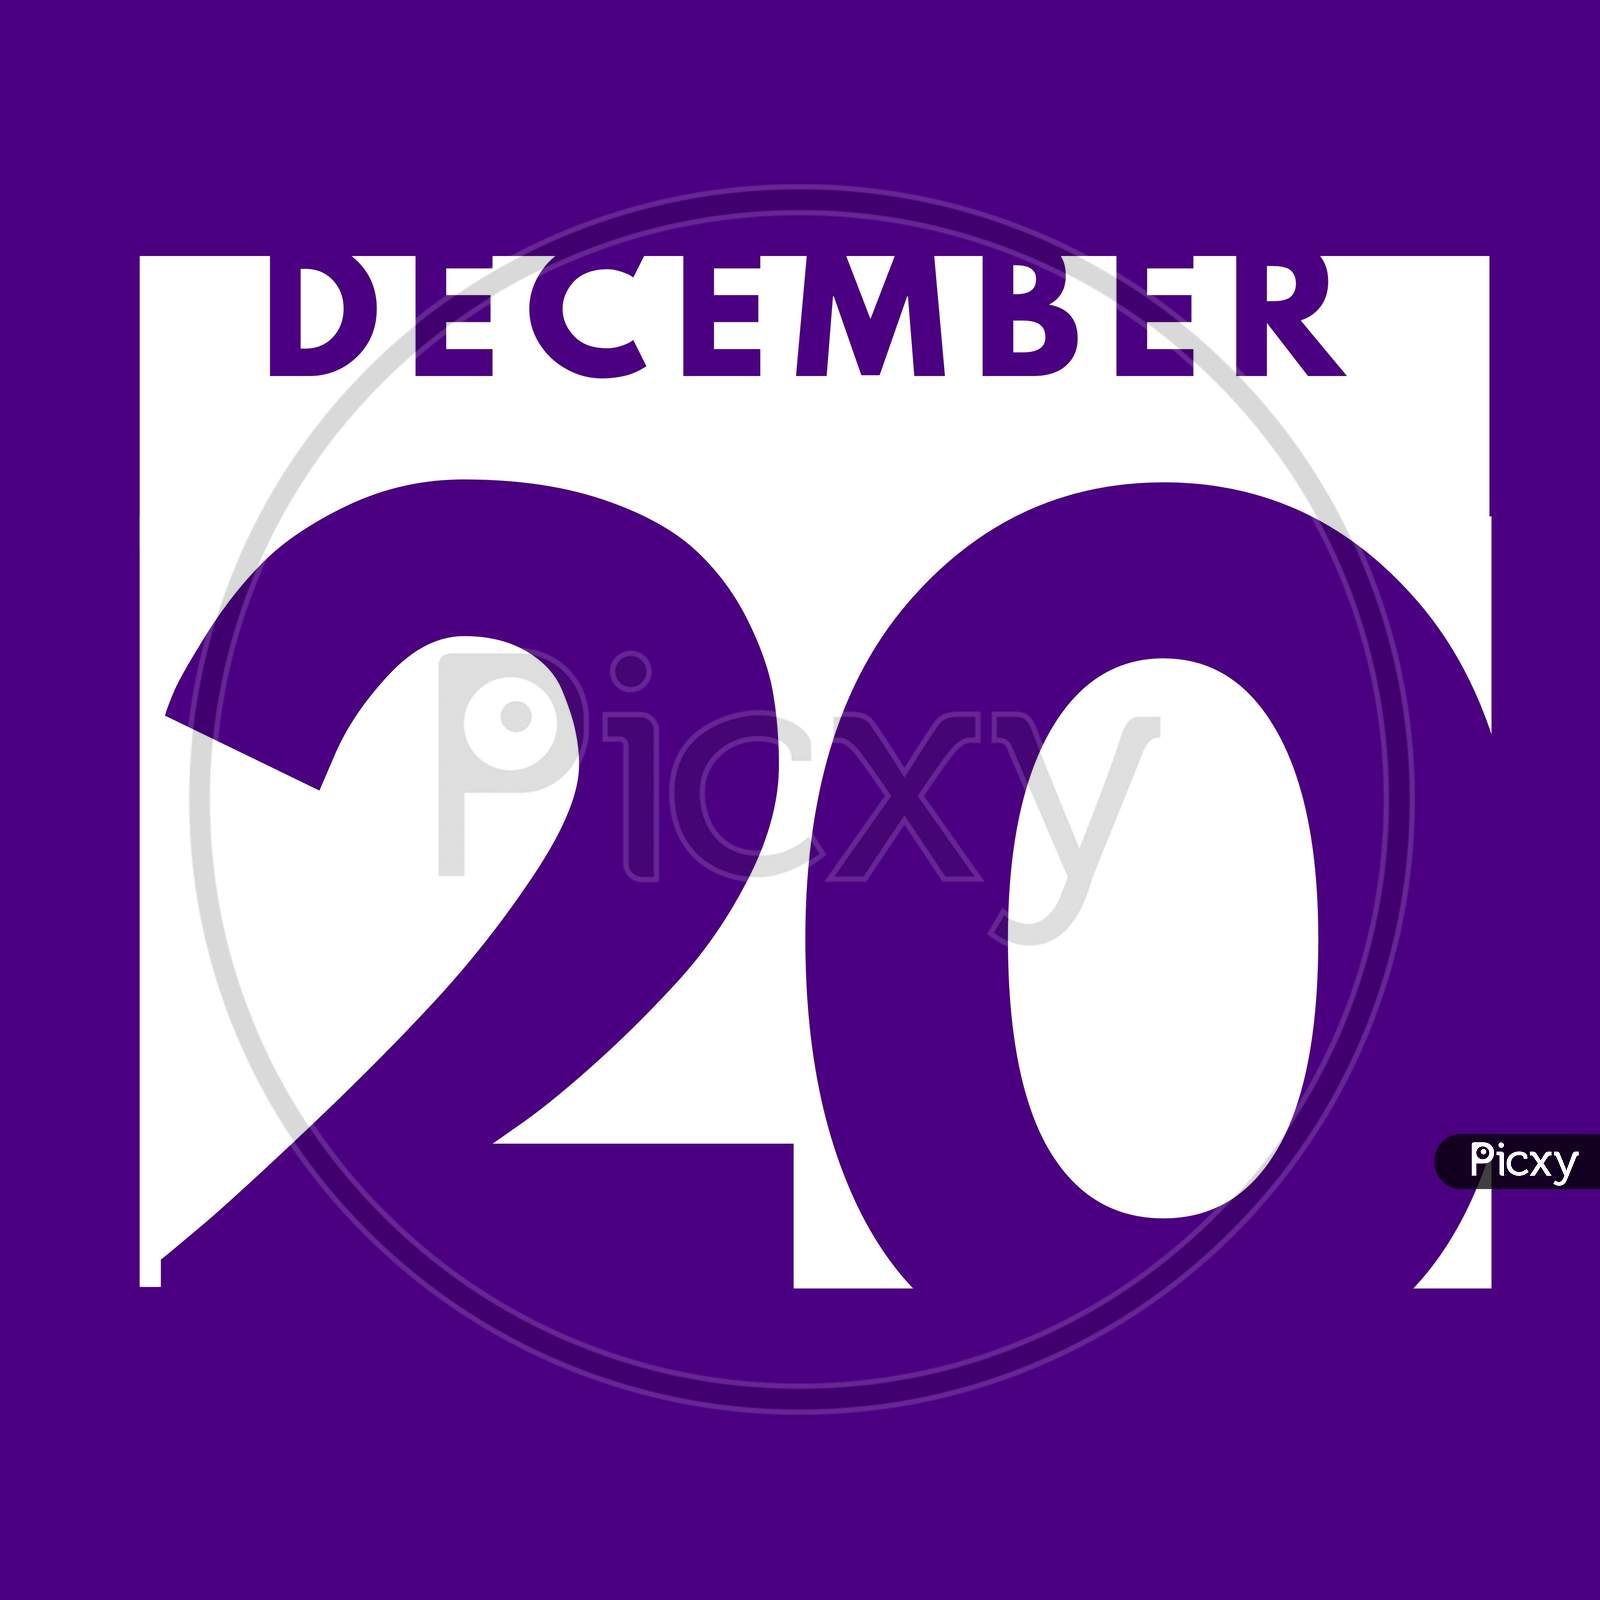 December 20 . Flat Modern Daily Calendar Icon .Date ,Day, Month .Calendar For The Month Of December